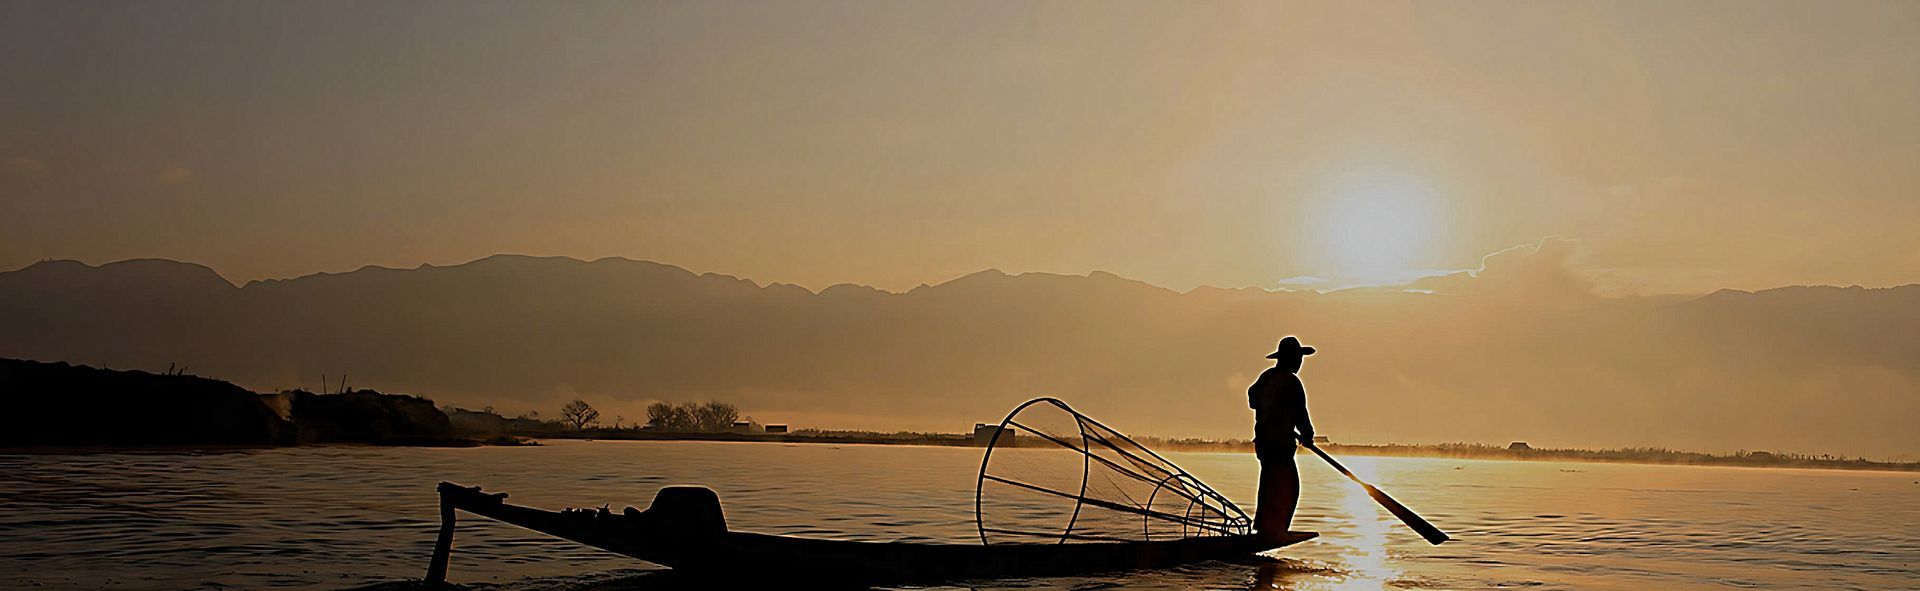 man on a boat paddling during sunset image